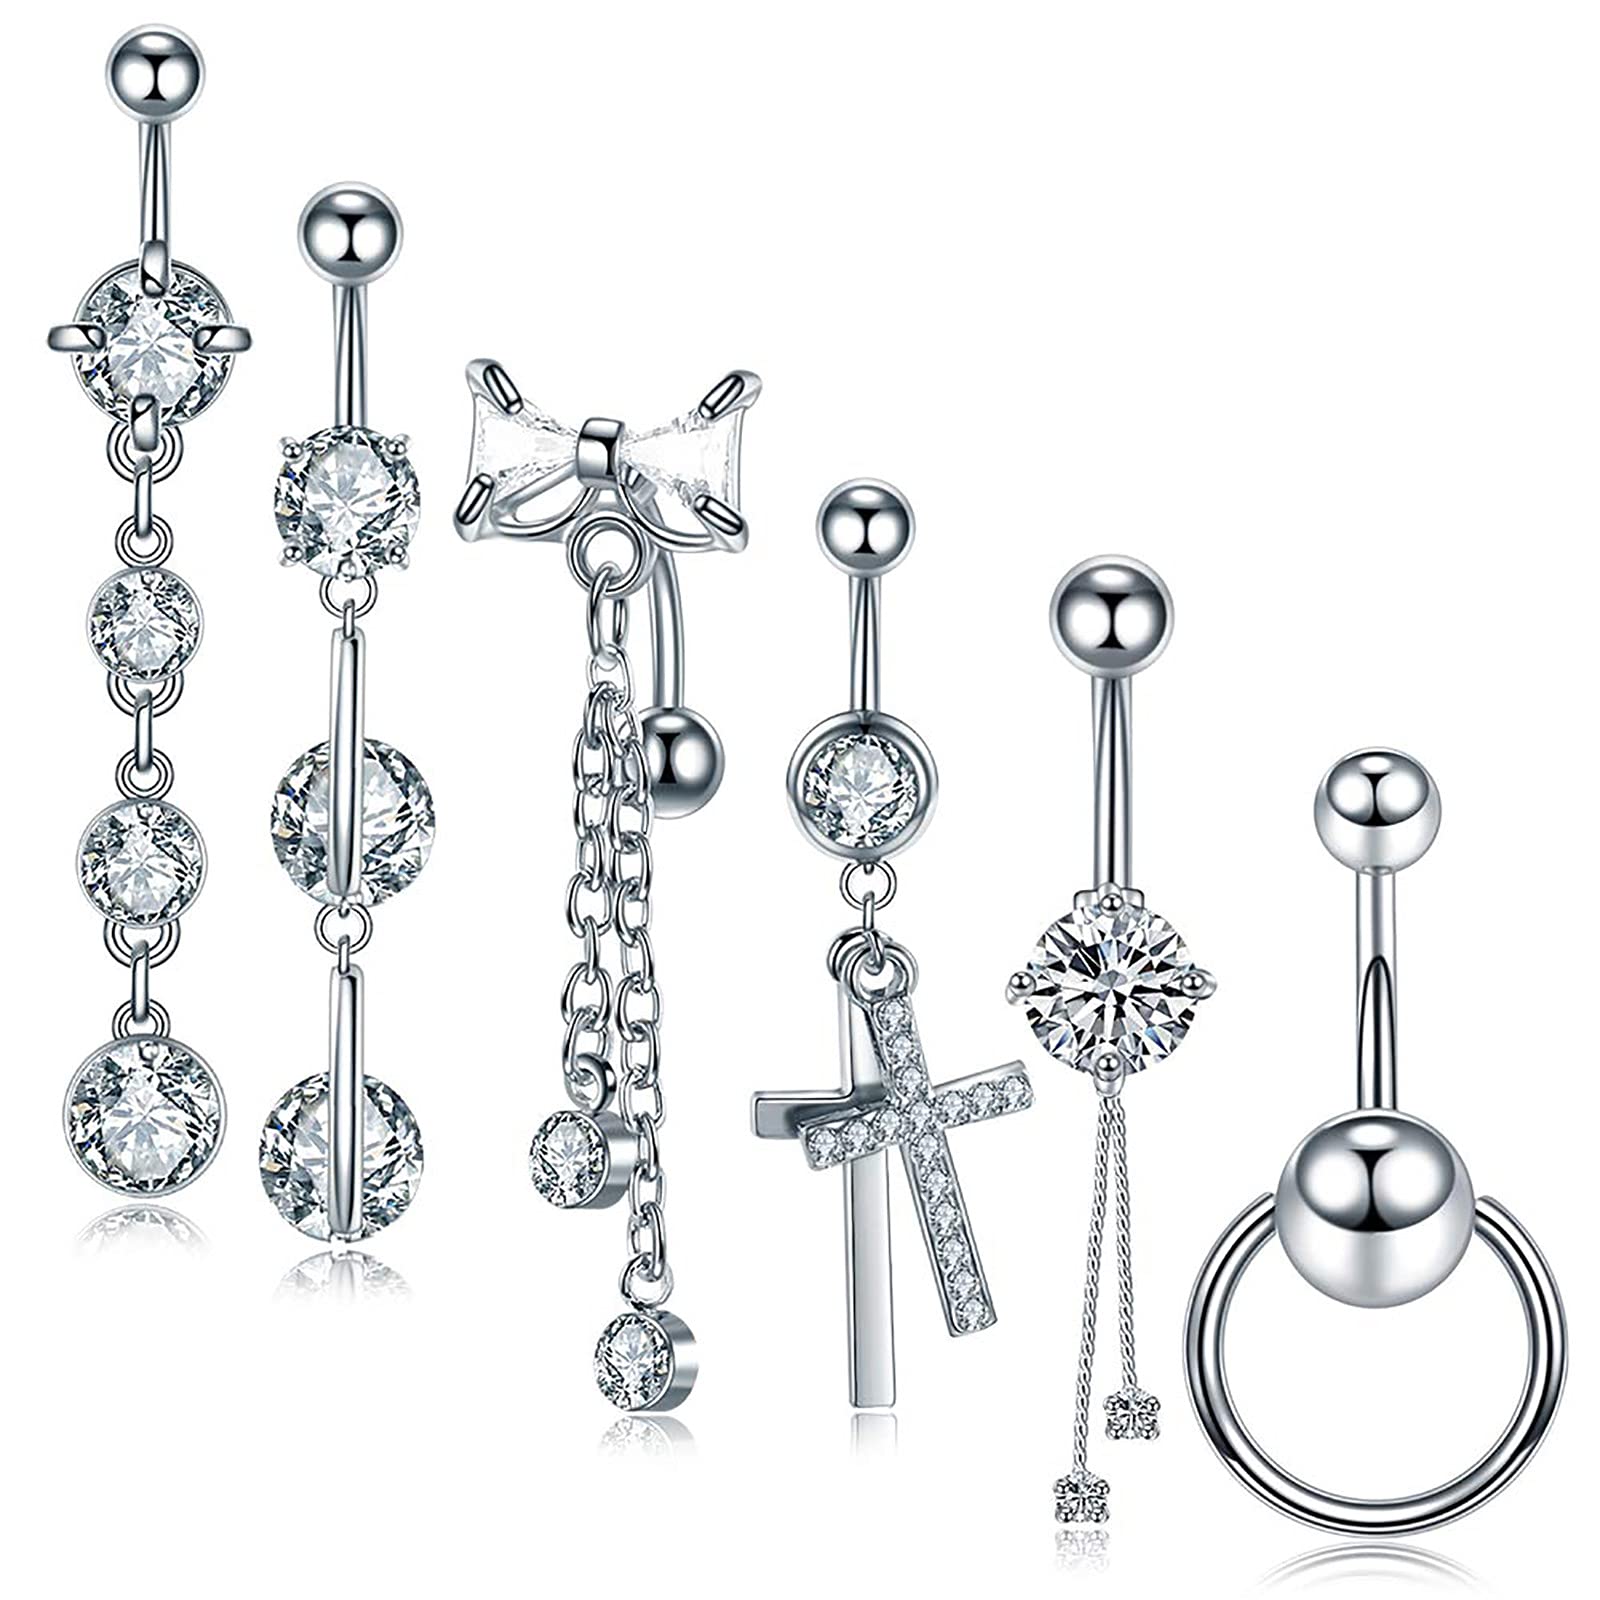 Aumeo 6PCS 14G CZ Belly Button Bars Dangly Belly Bars Stainless Steel Belly Piercing Jewellery